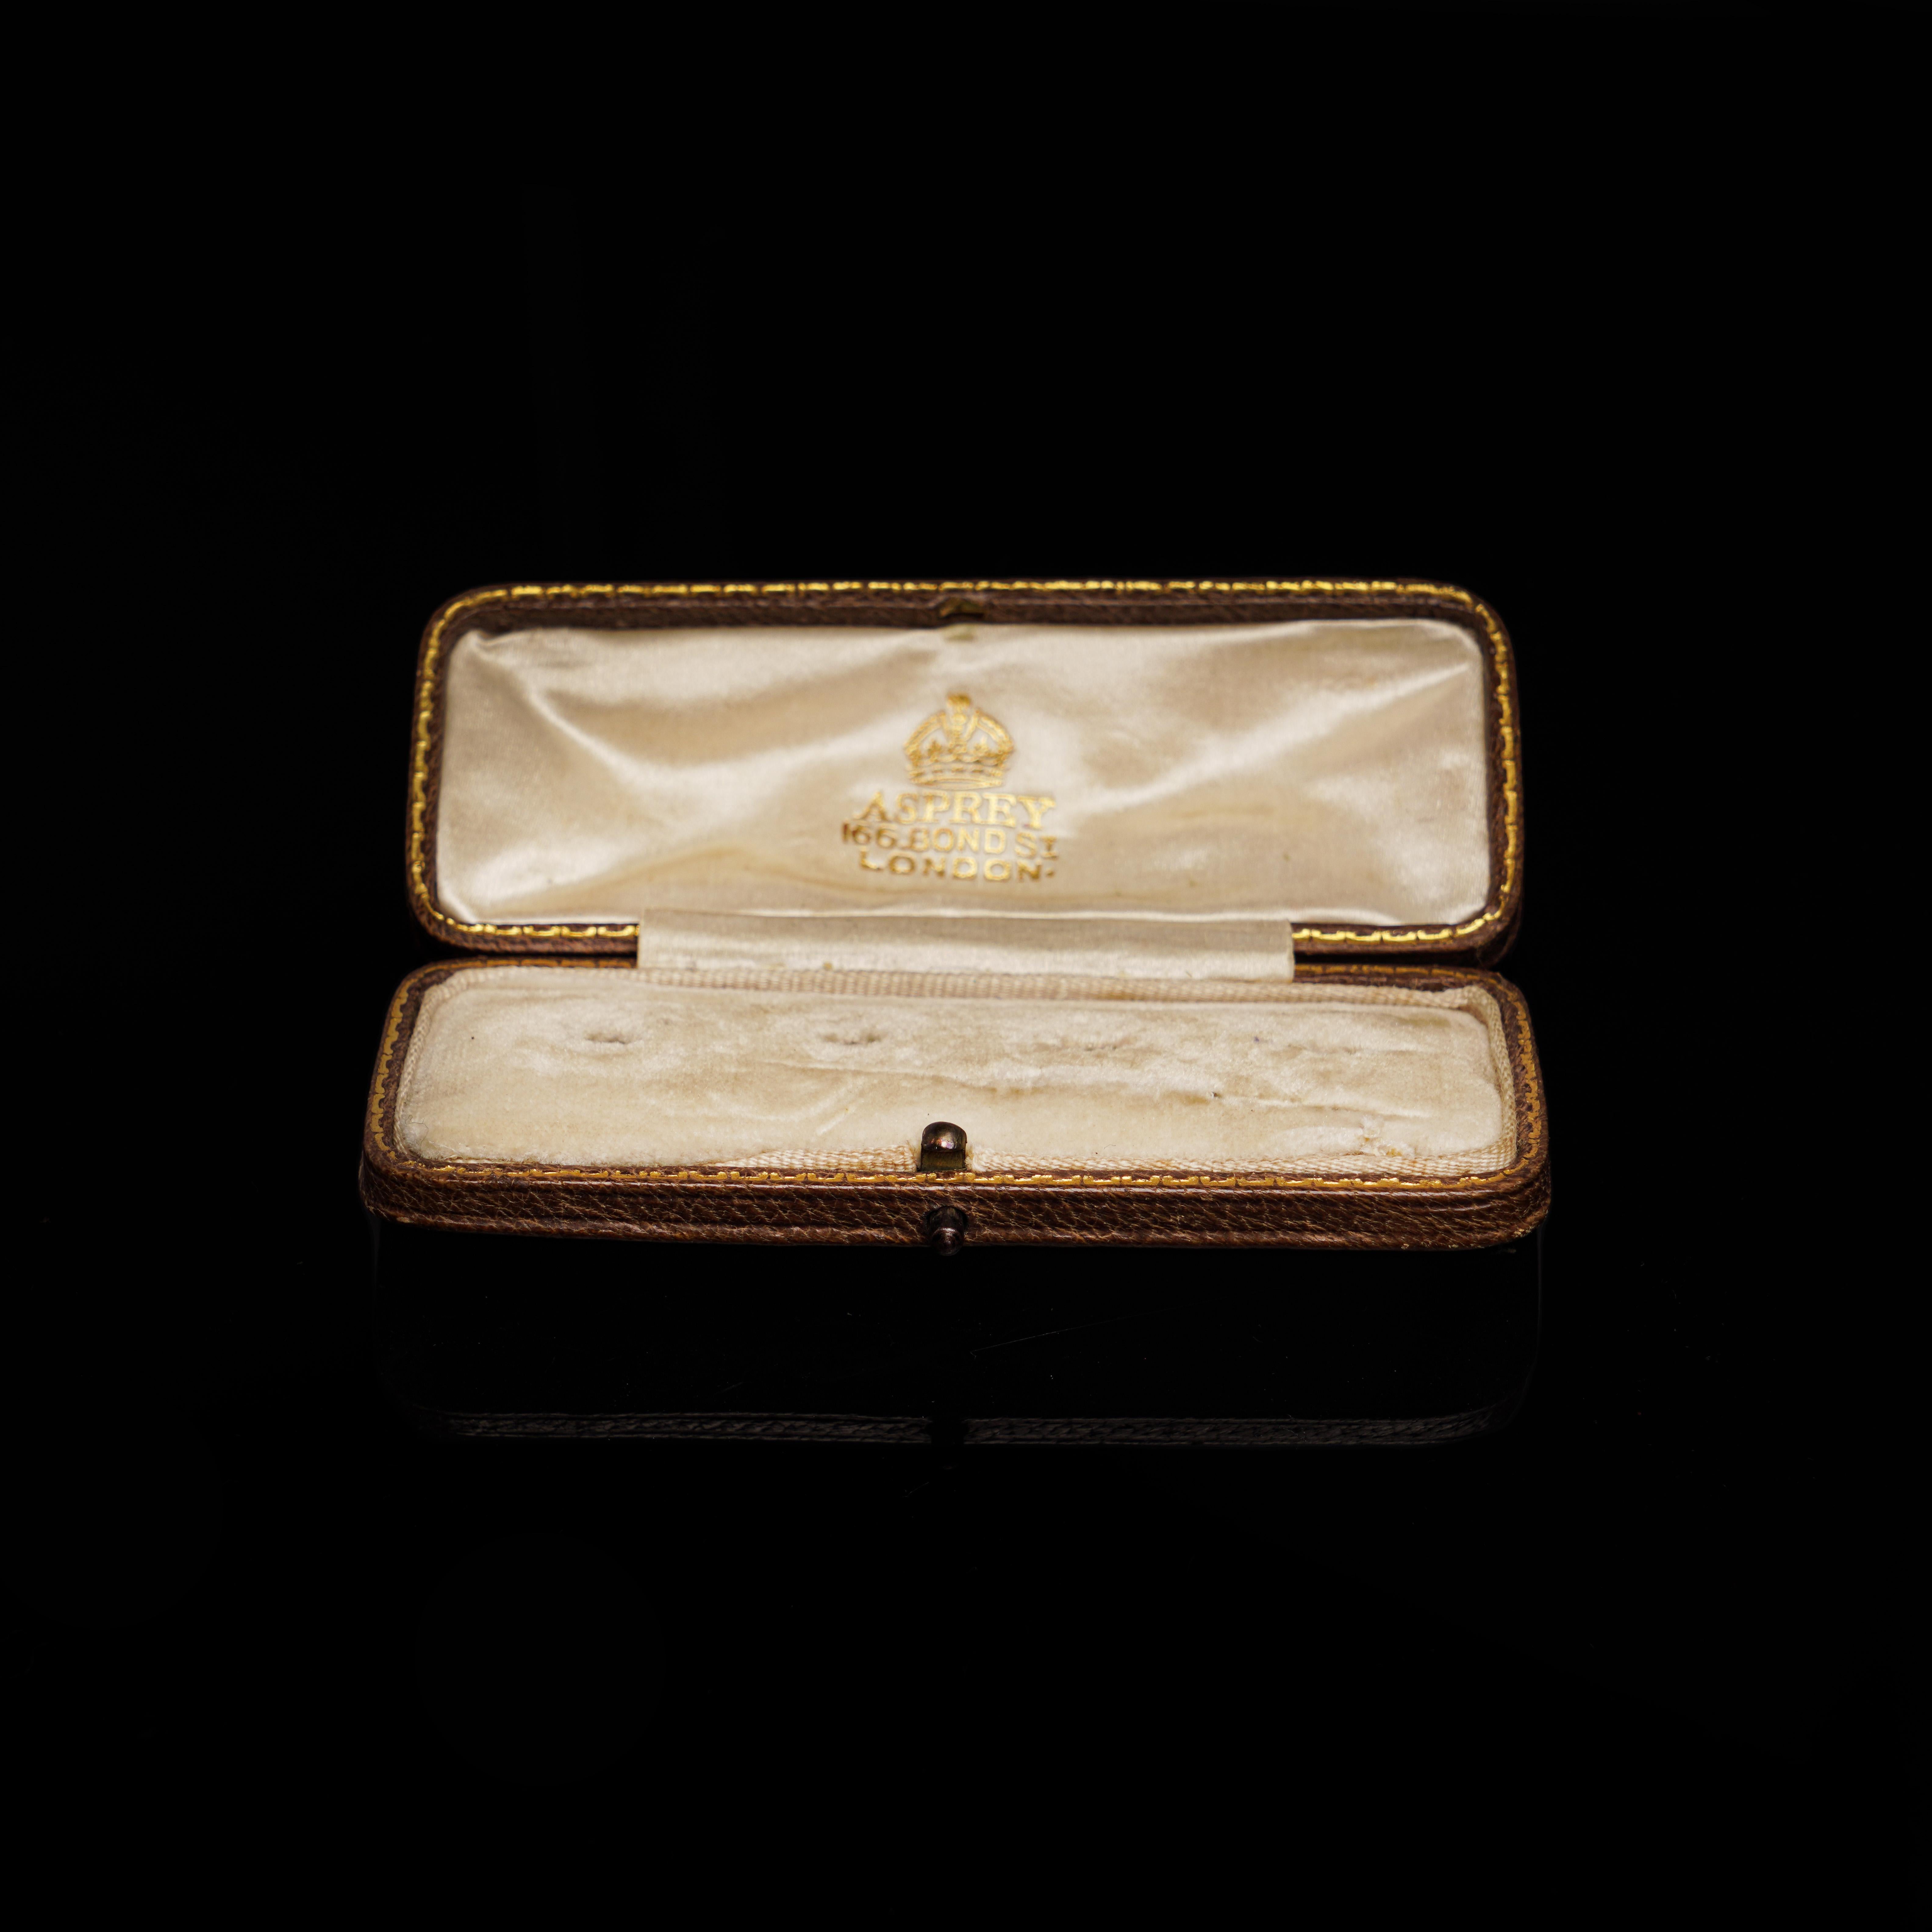 Asprey, London Bond Street cufflinks jewellery display box.

Dimensions:
Length x width x depth: 9.3 x 3.5 x 1.7 cm 
Weight: 22 grams 

Condition: Box is pre - owned, with minor signs of usage, good and pleasant condition overall. 

Founded in 1781